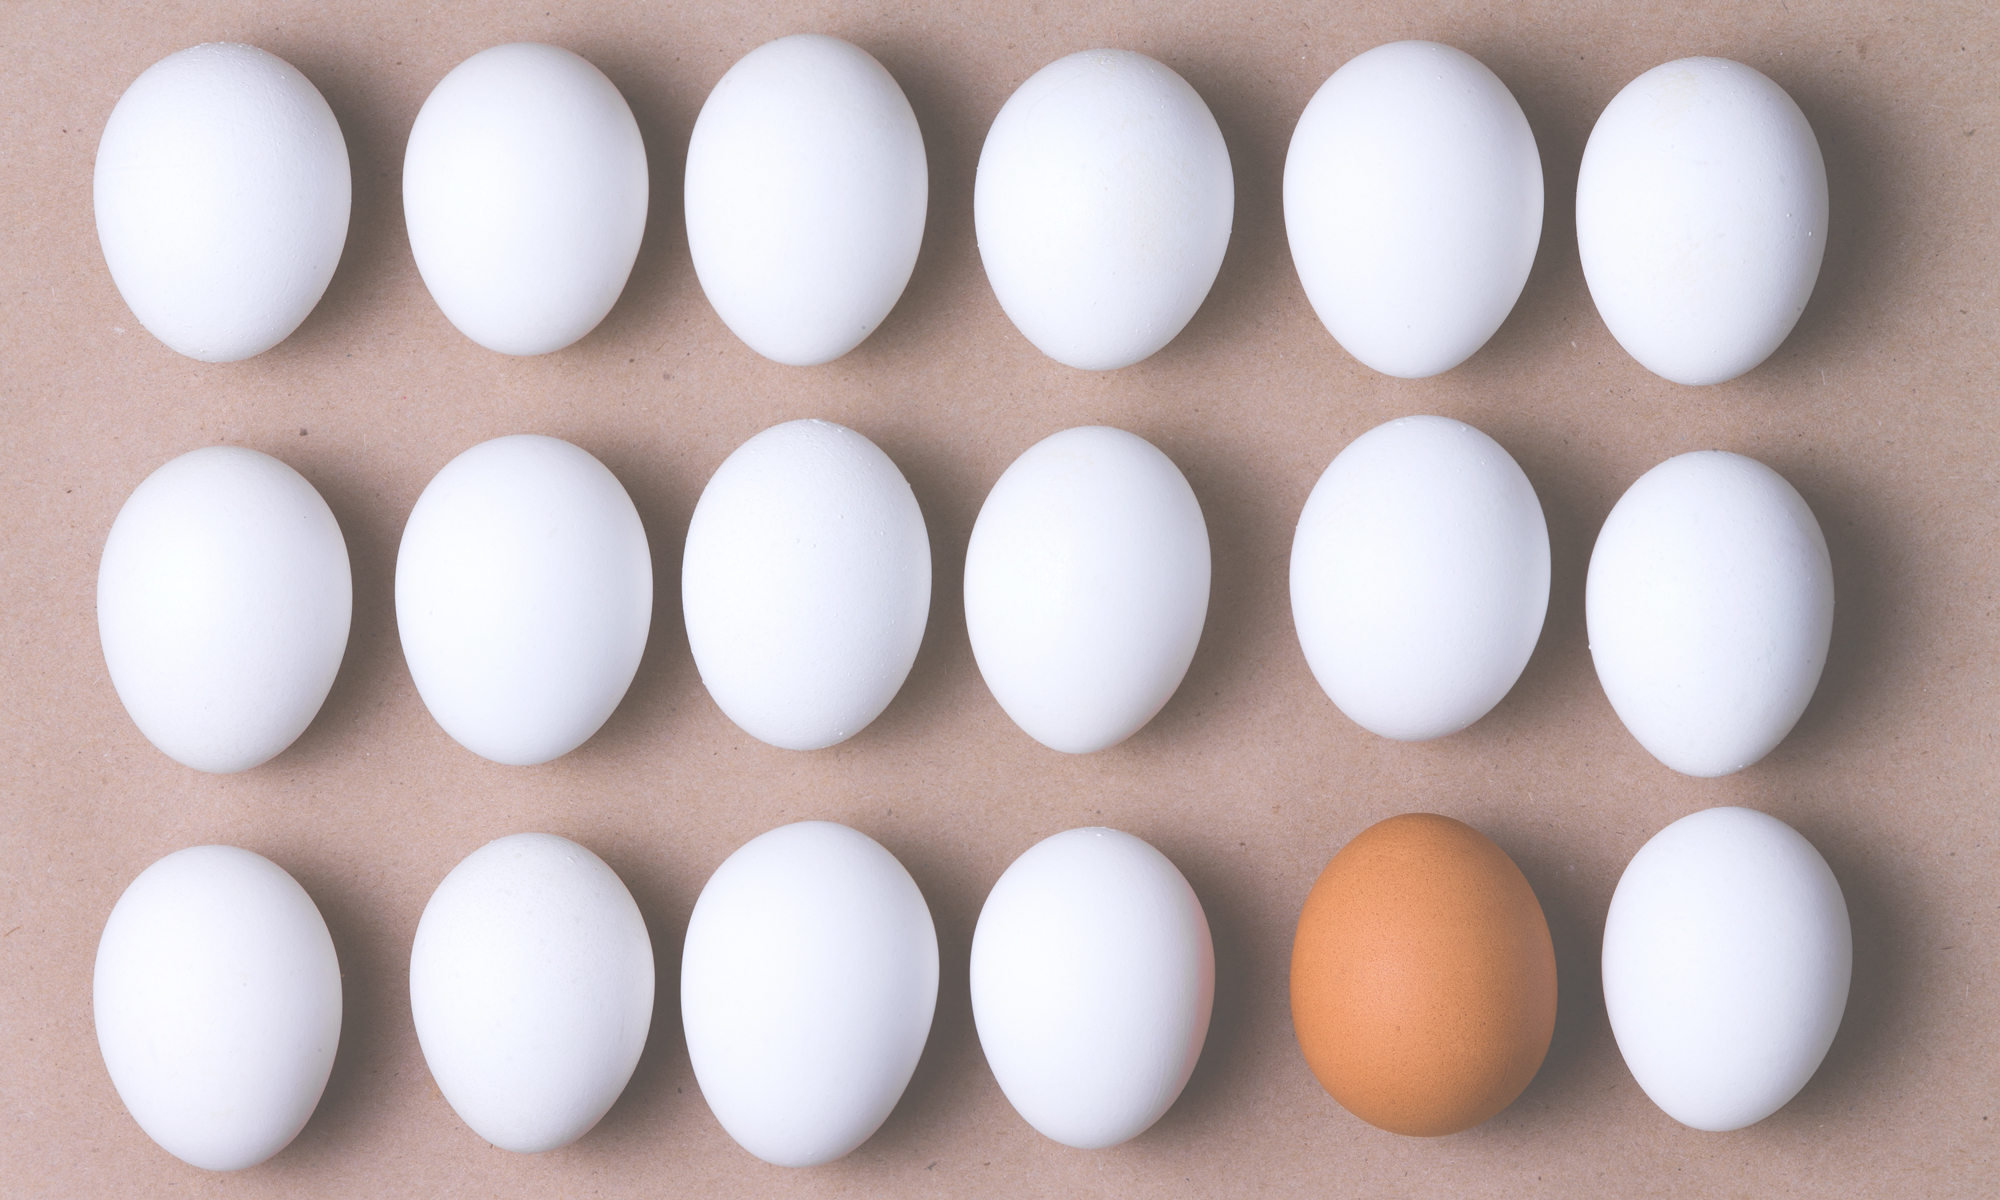 Eggs have been demonized for their high cholesterol content. But there’s more to this.